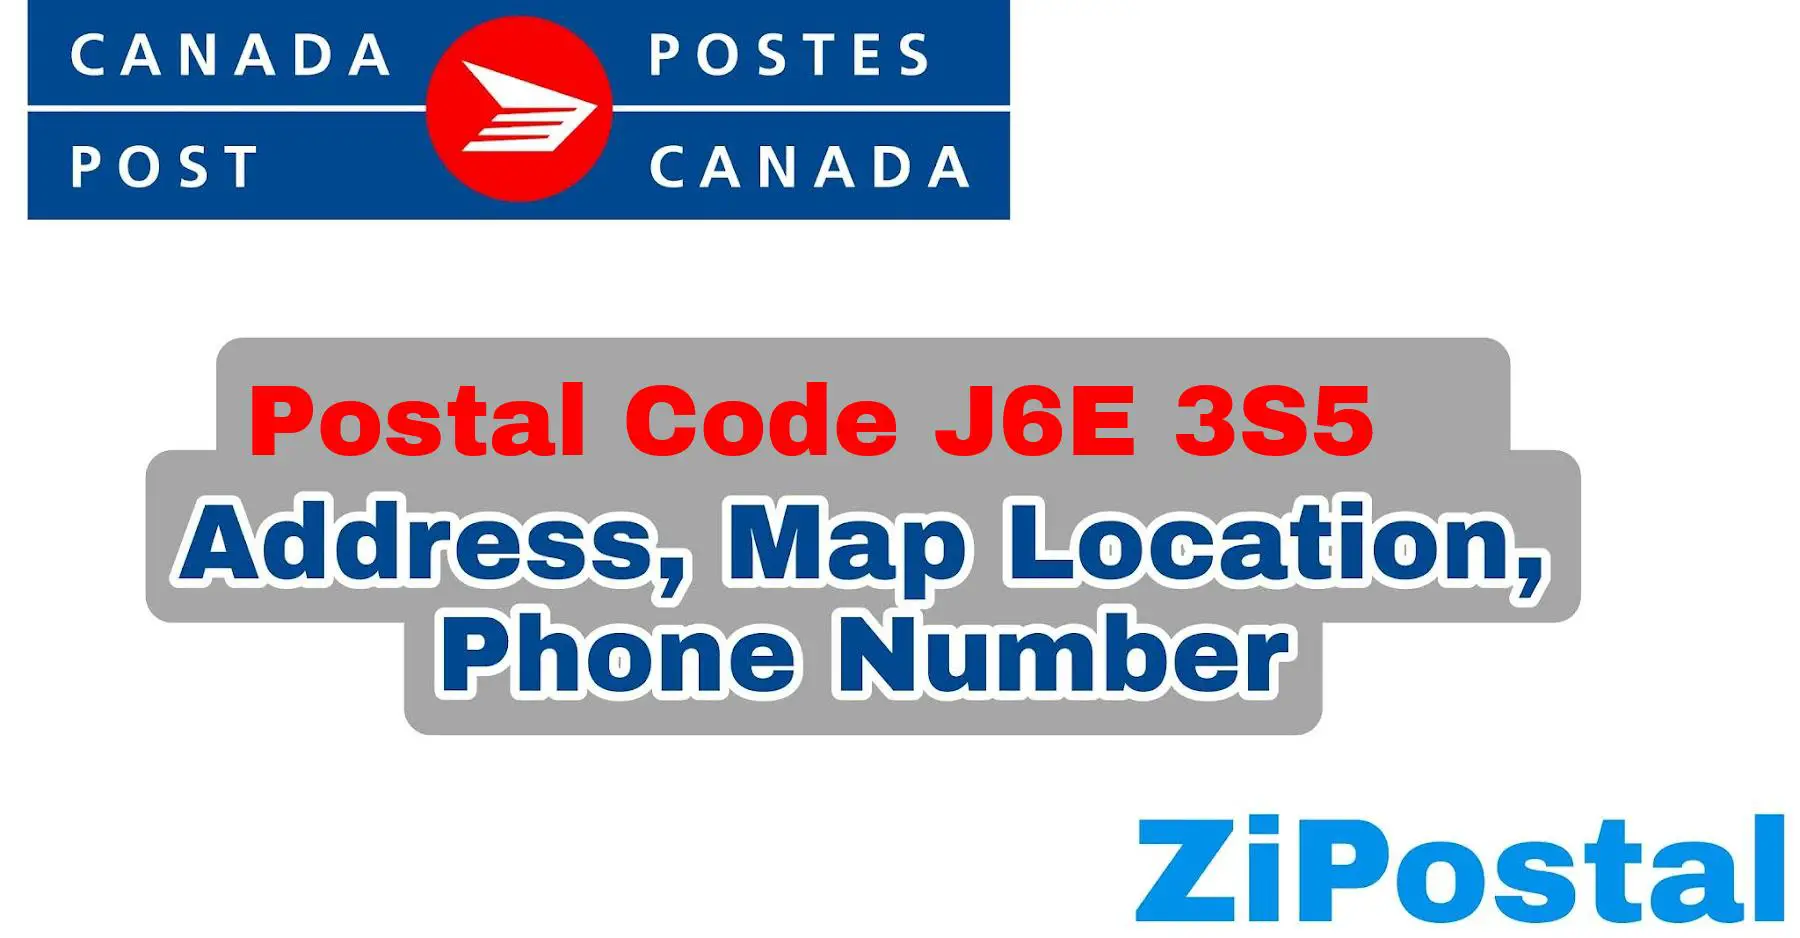 Postal Code J6E 3S5 Address Map Location and Phone Number